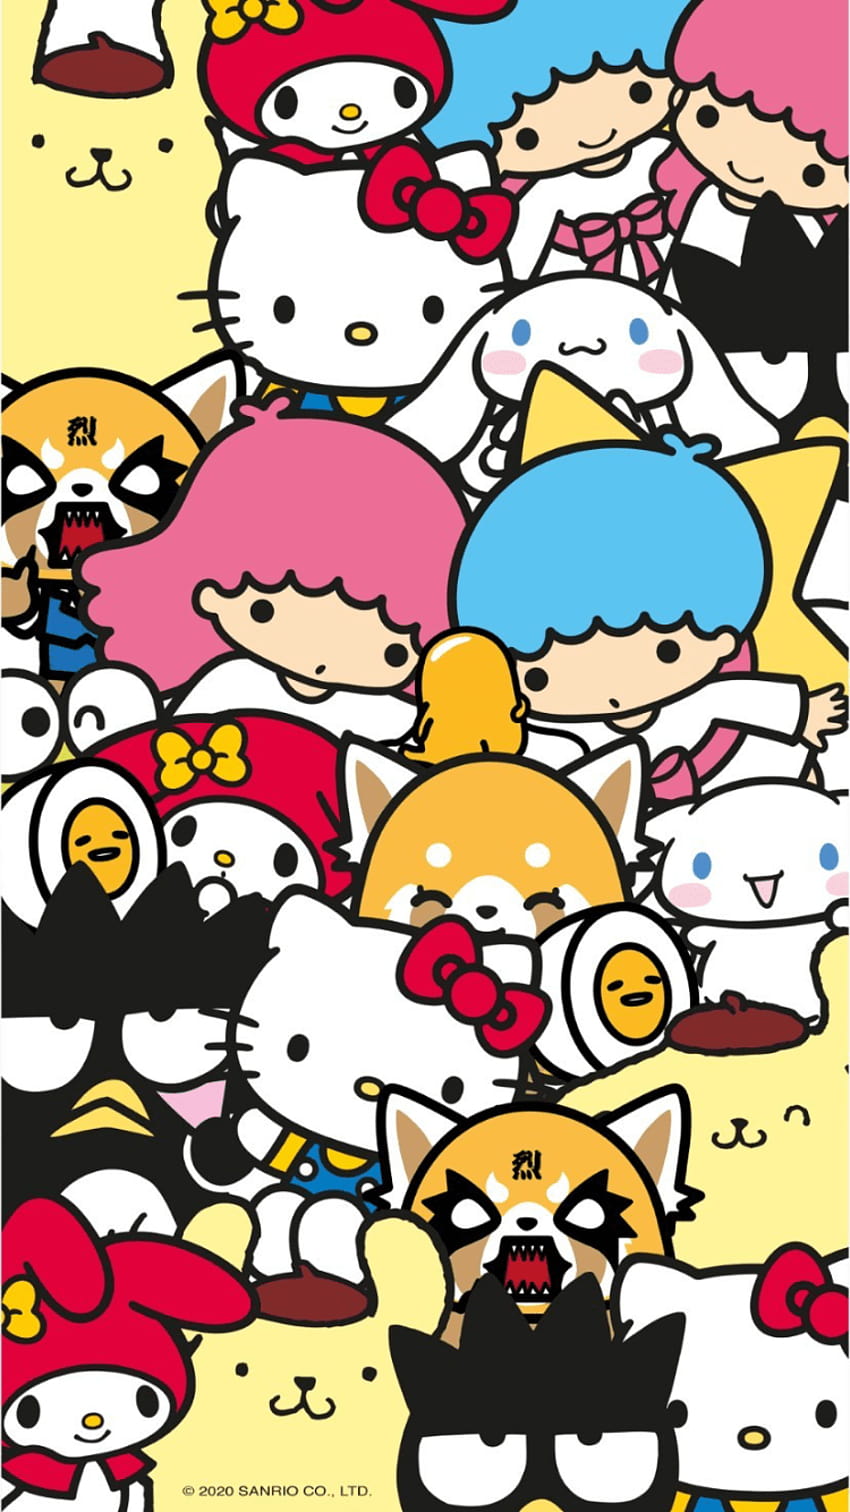 Hello Kitty - Desktop Wallpapers, Phone Wallpaper, PFP, Gifs, and More!